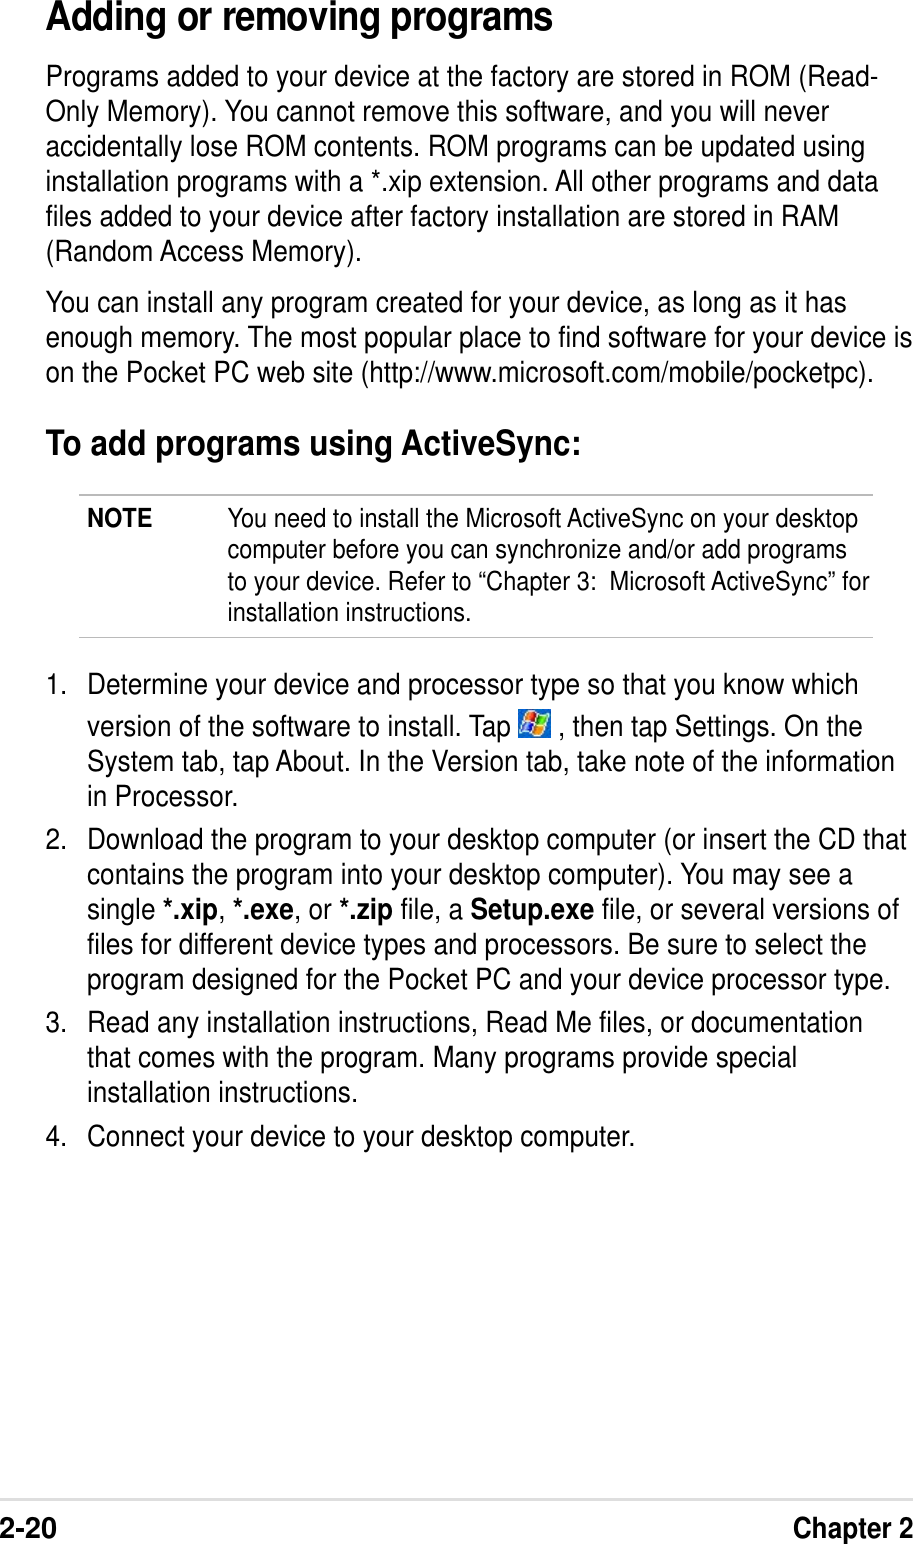 2-20Chapter 2Adding or removing programsPrograms added to your device at the factory are stored in ROM (Read-Only Memory). You cannot remove this software, and you will neveraccidentally lose ROM contents. ROM programs can be updated usinginstallation programs with a *.xip extension. All other programs and datafiles added to your device after factory installation are stored in RAM(Random Access Memory).You can install any program created for your device, as long as it hasenough memory. The most popular place to find software for your device ison the Pocket PC web site (http://www.microsoft.com/mobile/pocketpc).To add programs using ActiveSync:NOTE You need to install the Microsoft ActiveSync on your desktopcomputer before you can synchronize and/or add programsto your device. Refer to “Chapter 3:  Microsoft ActiveSync” forinstallation instructions.1. Determine your device and processor type so that you know whichversion of the software to install. Tap   , then tap Settings. On theSystem tab, tap About. In the Version tab, take note of the informationin Processor.2. Download the program to your desktop computer (or insert the CD thatcontains the program into your desktop computer). You may see asingle *.xip, *.exe, or *.zip file, a Setup.exe file, or several versions offiles for different device types and processors. Be sure to select theprogram designed for the Pocket PC and your device processor type.3. Read any installation instructions, Read Me files, or documentationthat comes with the program. Many programs provide specialinstallation instructions.4. Connect your device to your desktop computer.